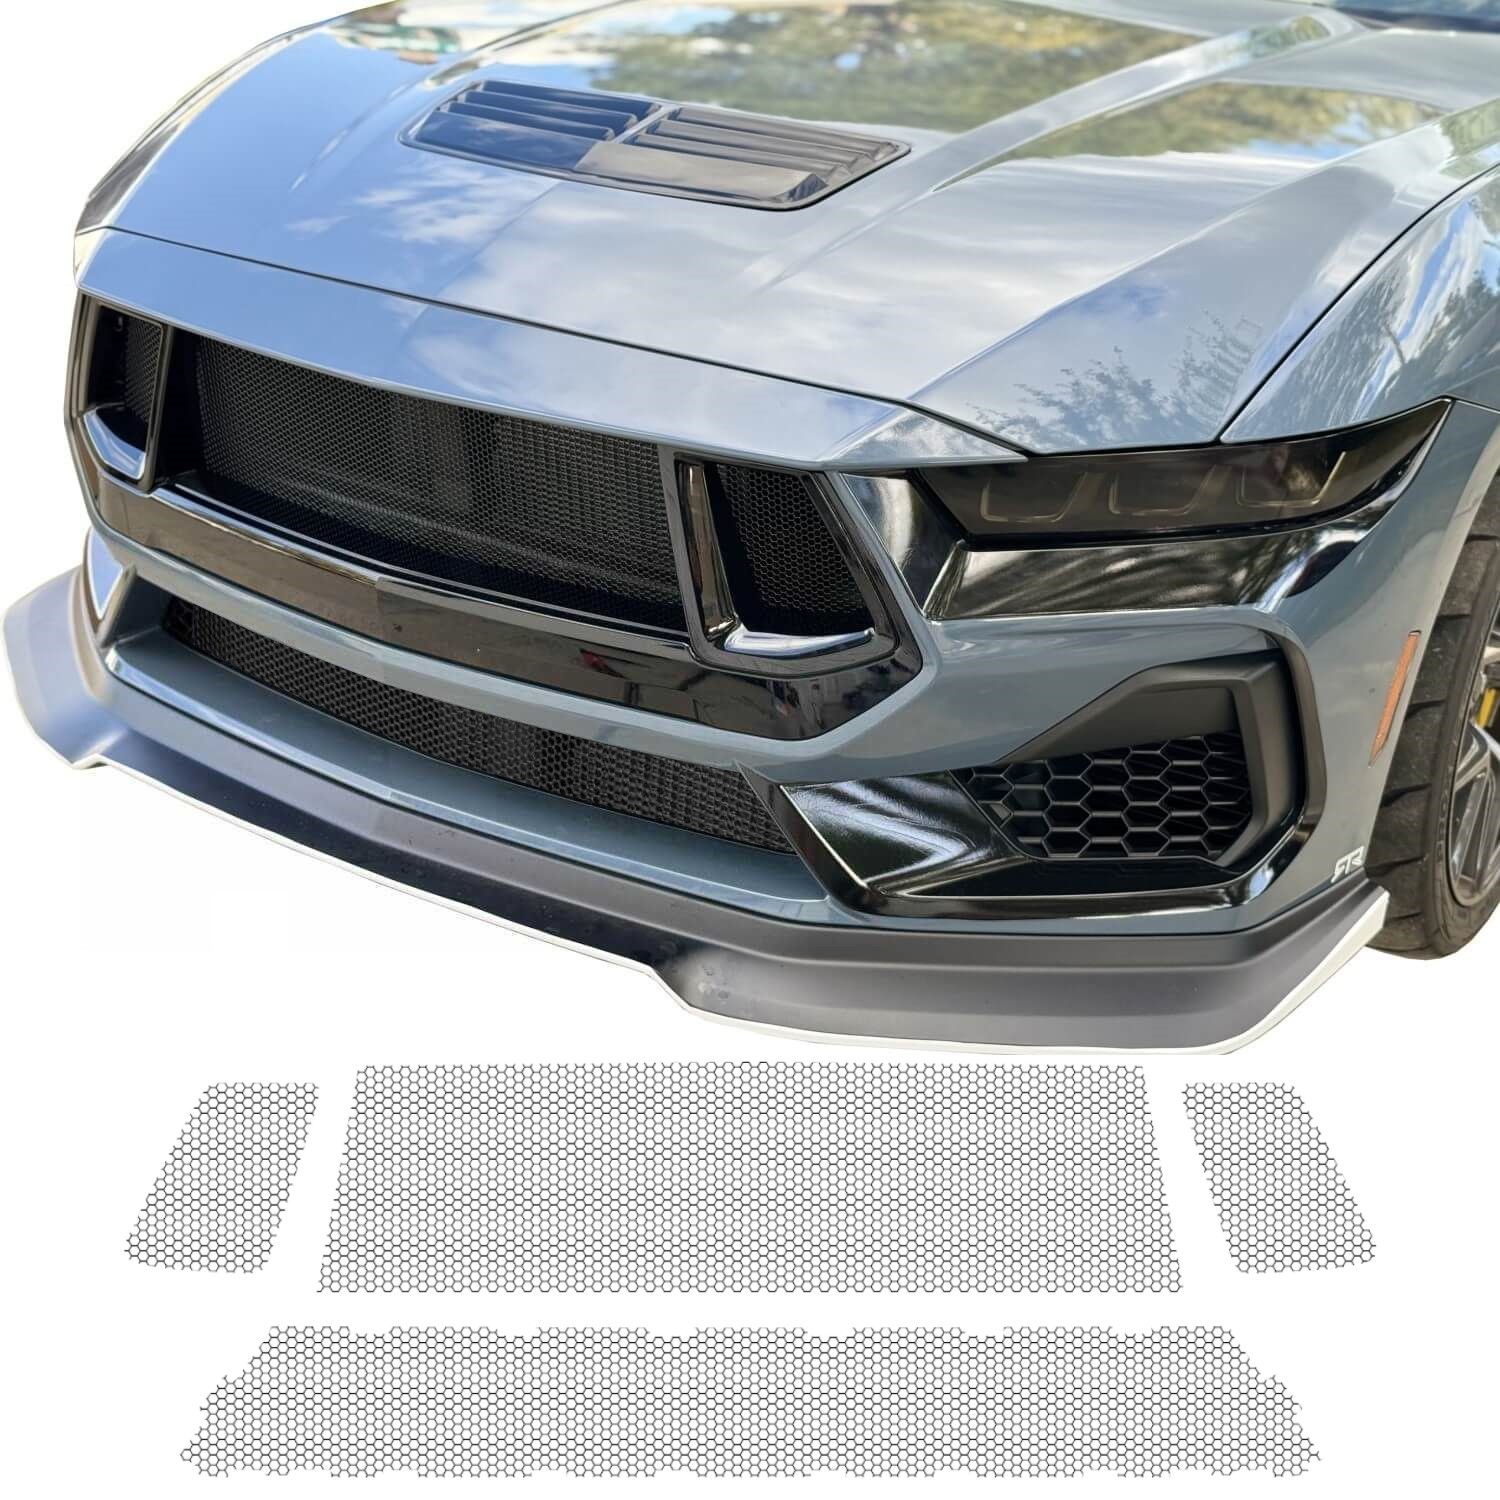 Custom Mesh Grills for Ford Mustang by customcargrills.com